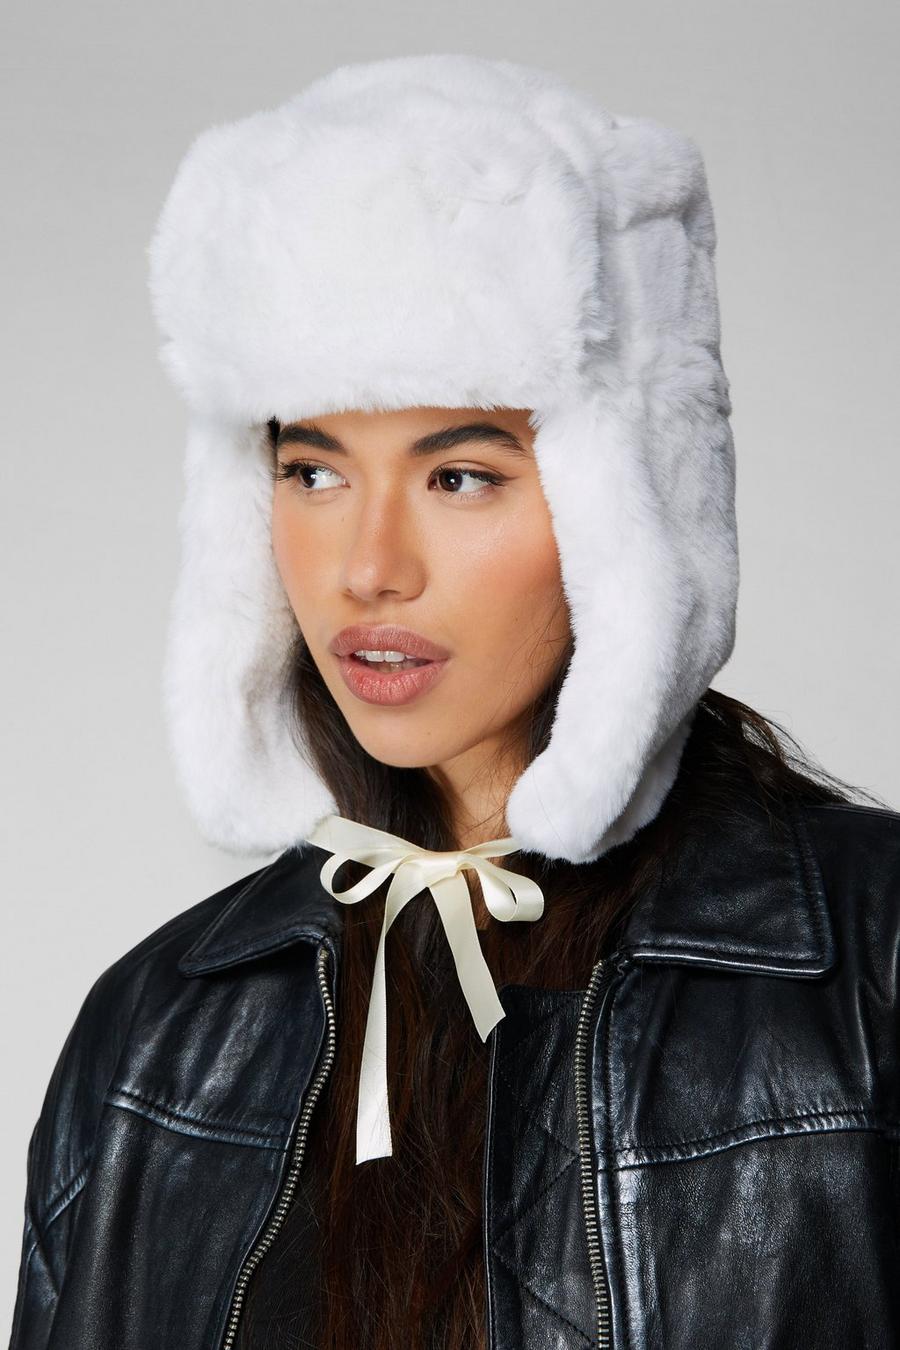 Hats and Hair Accessories | Headscarves & Beanies | Nasty Gal